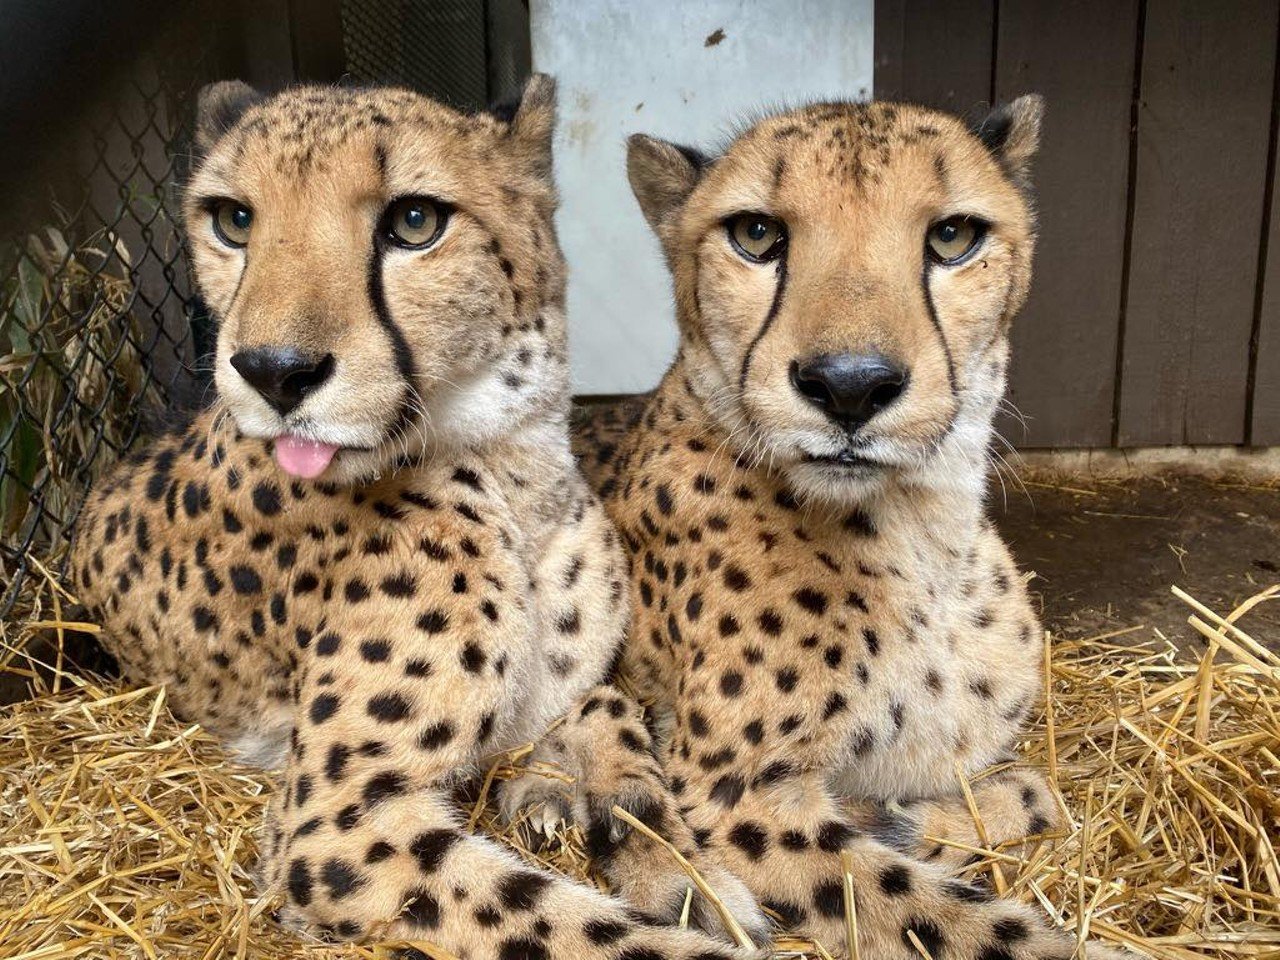 Chance and Bravo turned 17 in May, making them possibly the oldest cheetahs in the country.